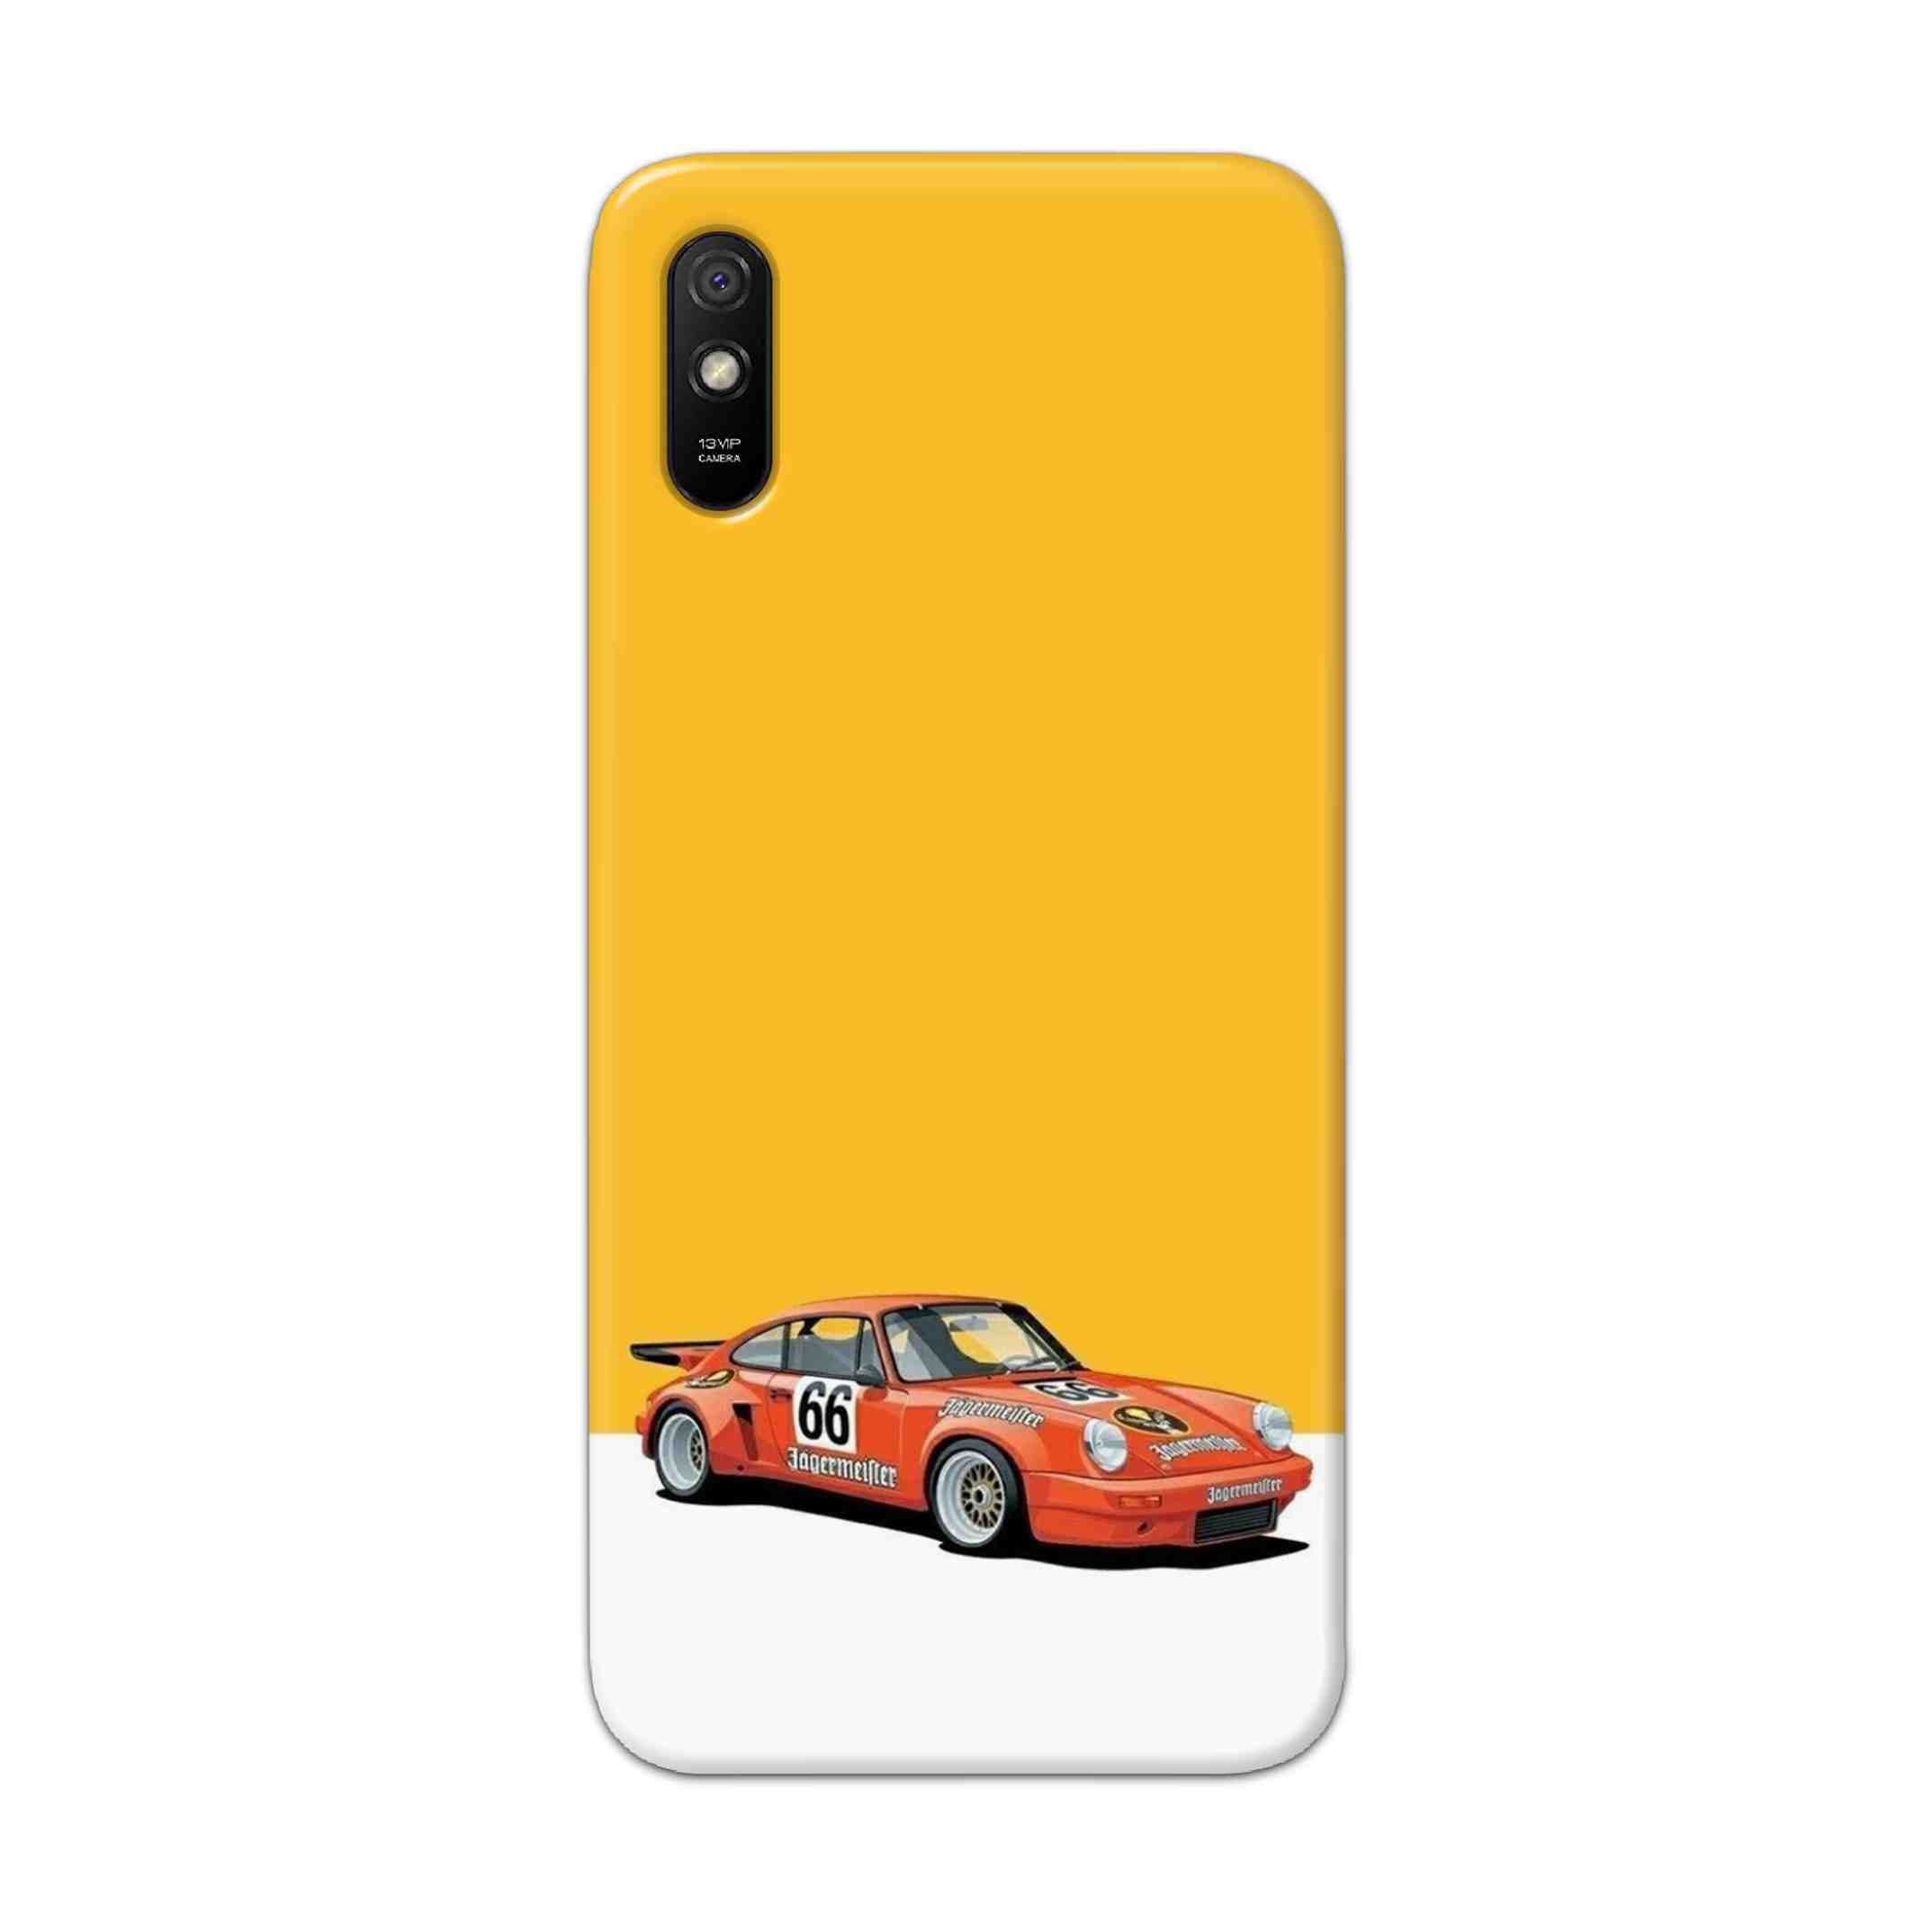 Buy Porche Hard Back Mobile Phone Case Cover For Redmi 9A Online